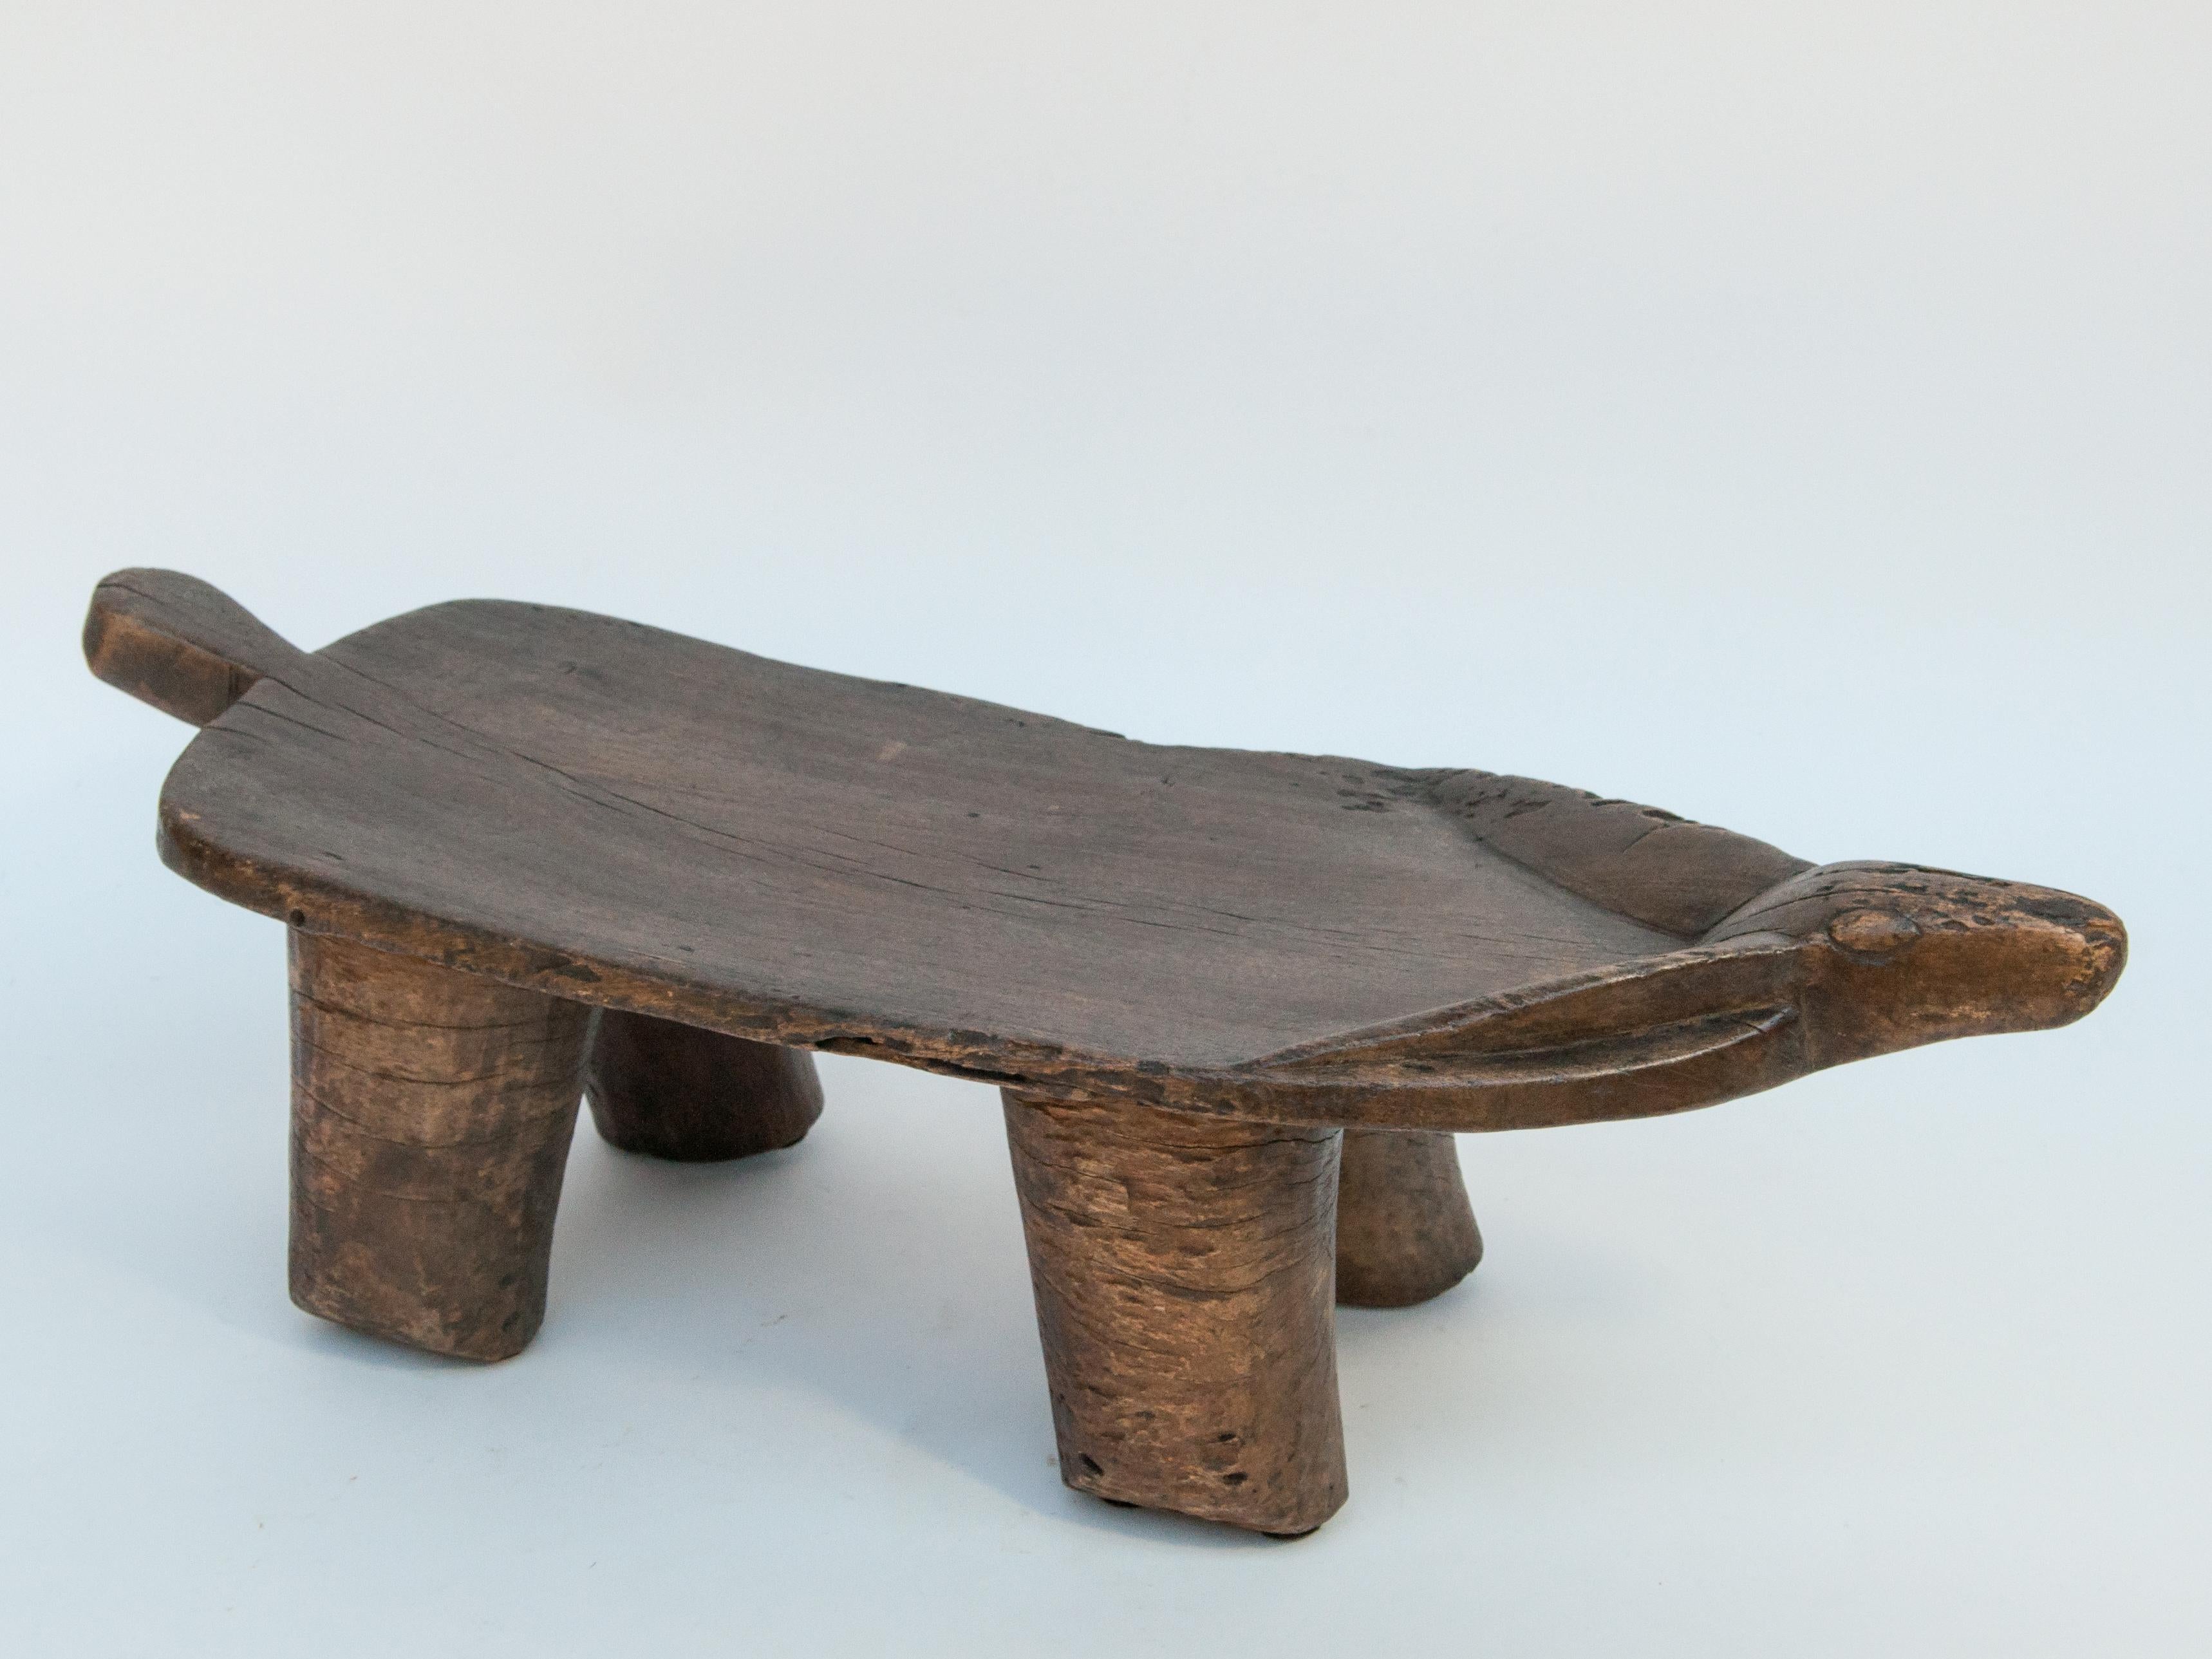 Small tribal wooden stool, animal motif. Fulani people of Niger, Mid-late 20th century.
Offered by Bruce Hughes.
This playful rustic wooden stool was fashioned by hand from a single piece of wood. Using very basic tools. It comes from the Fulani,